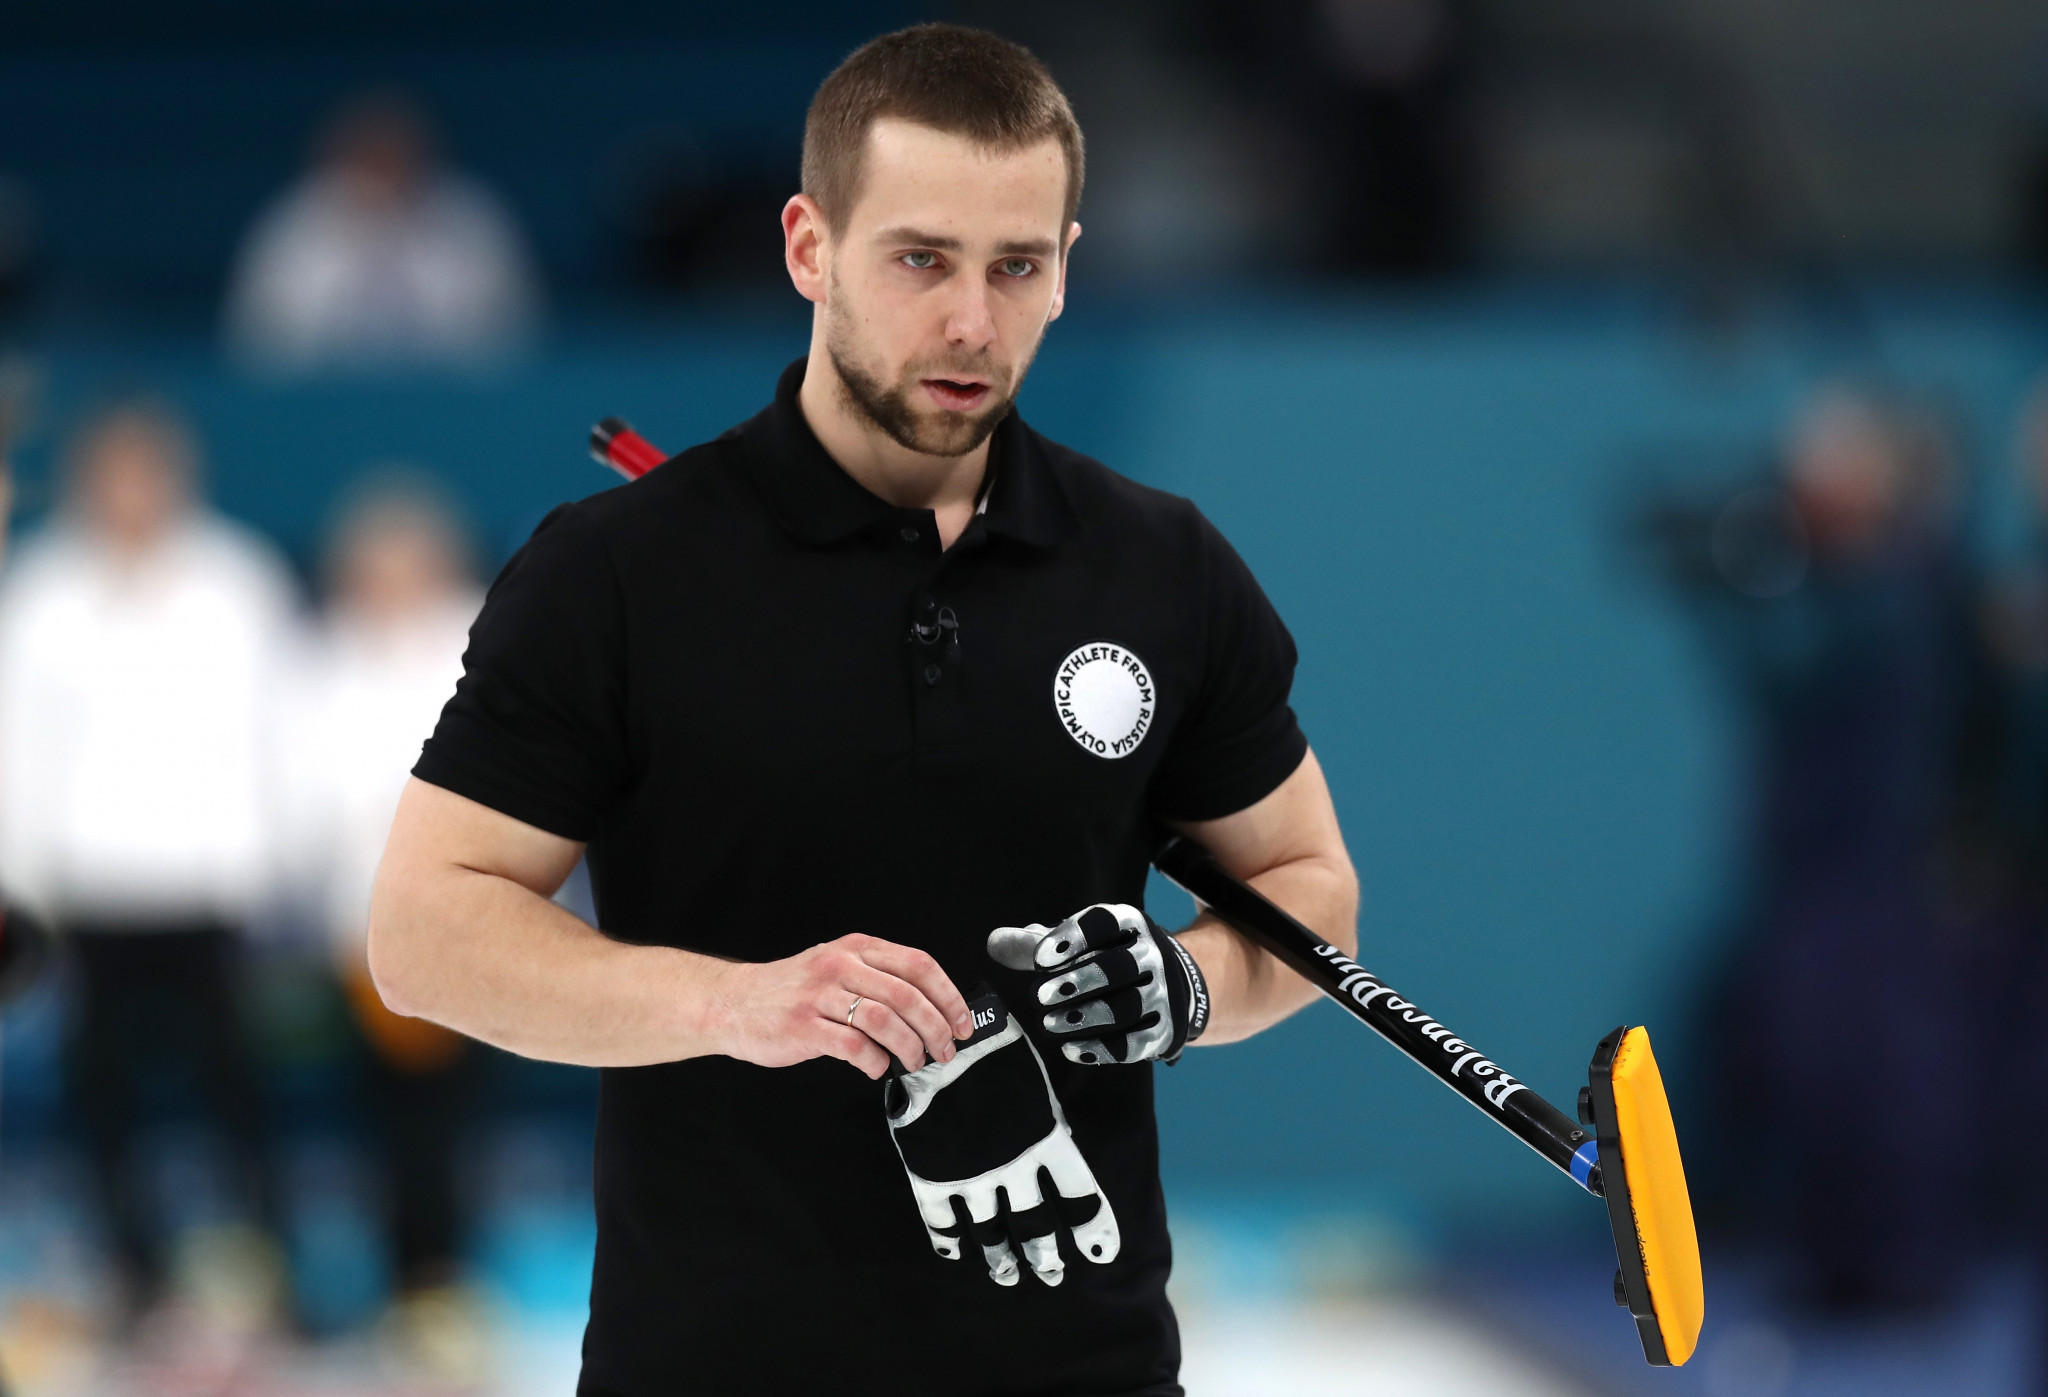 Russian curler banned for doping at Pyeongchang 2018 plans to return as suspension ends today